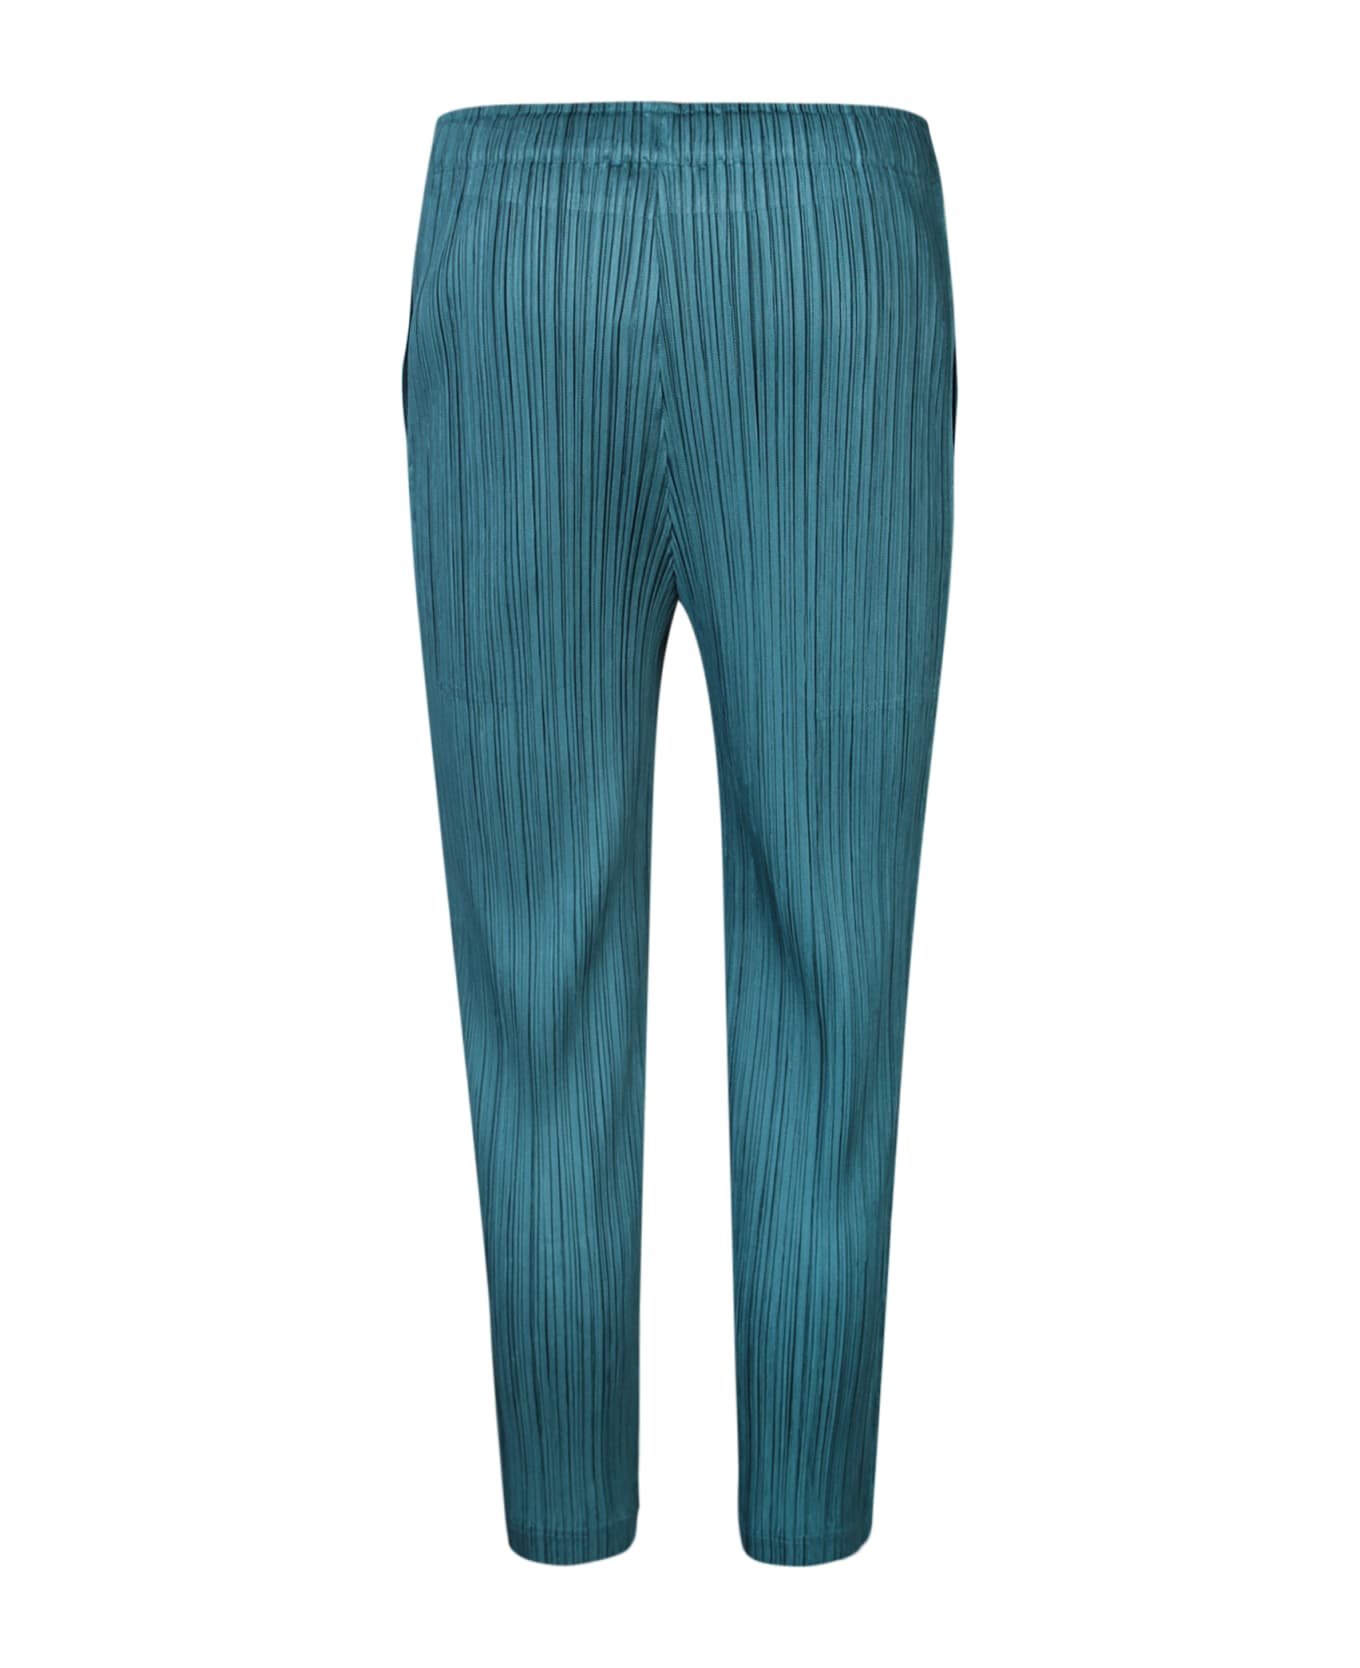 Issey Miyake Pleated Petrol Green Trousers - Green